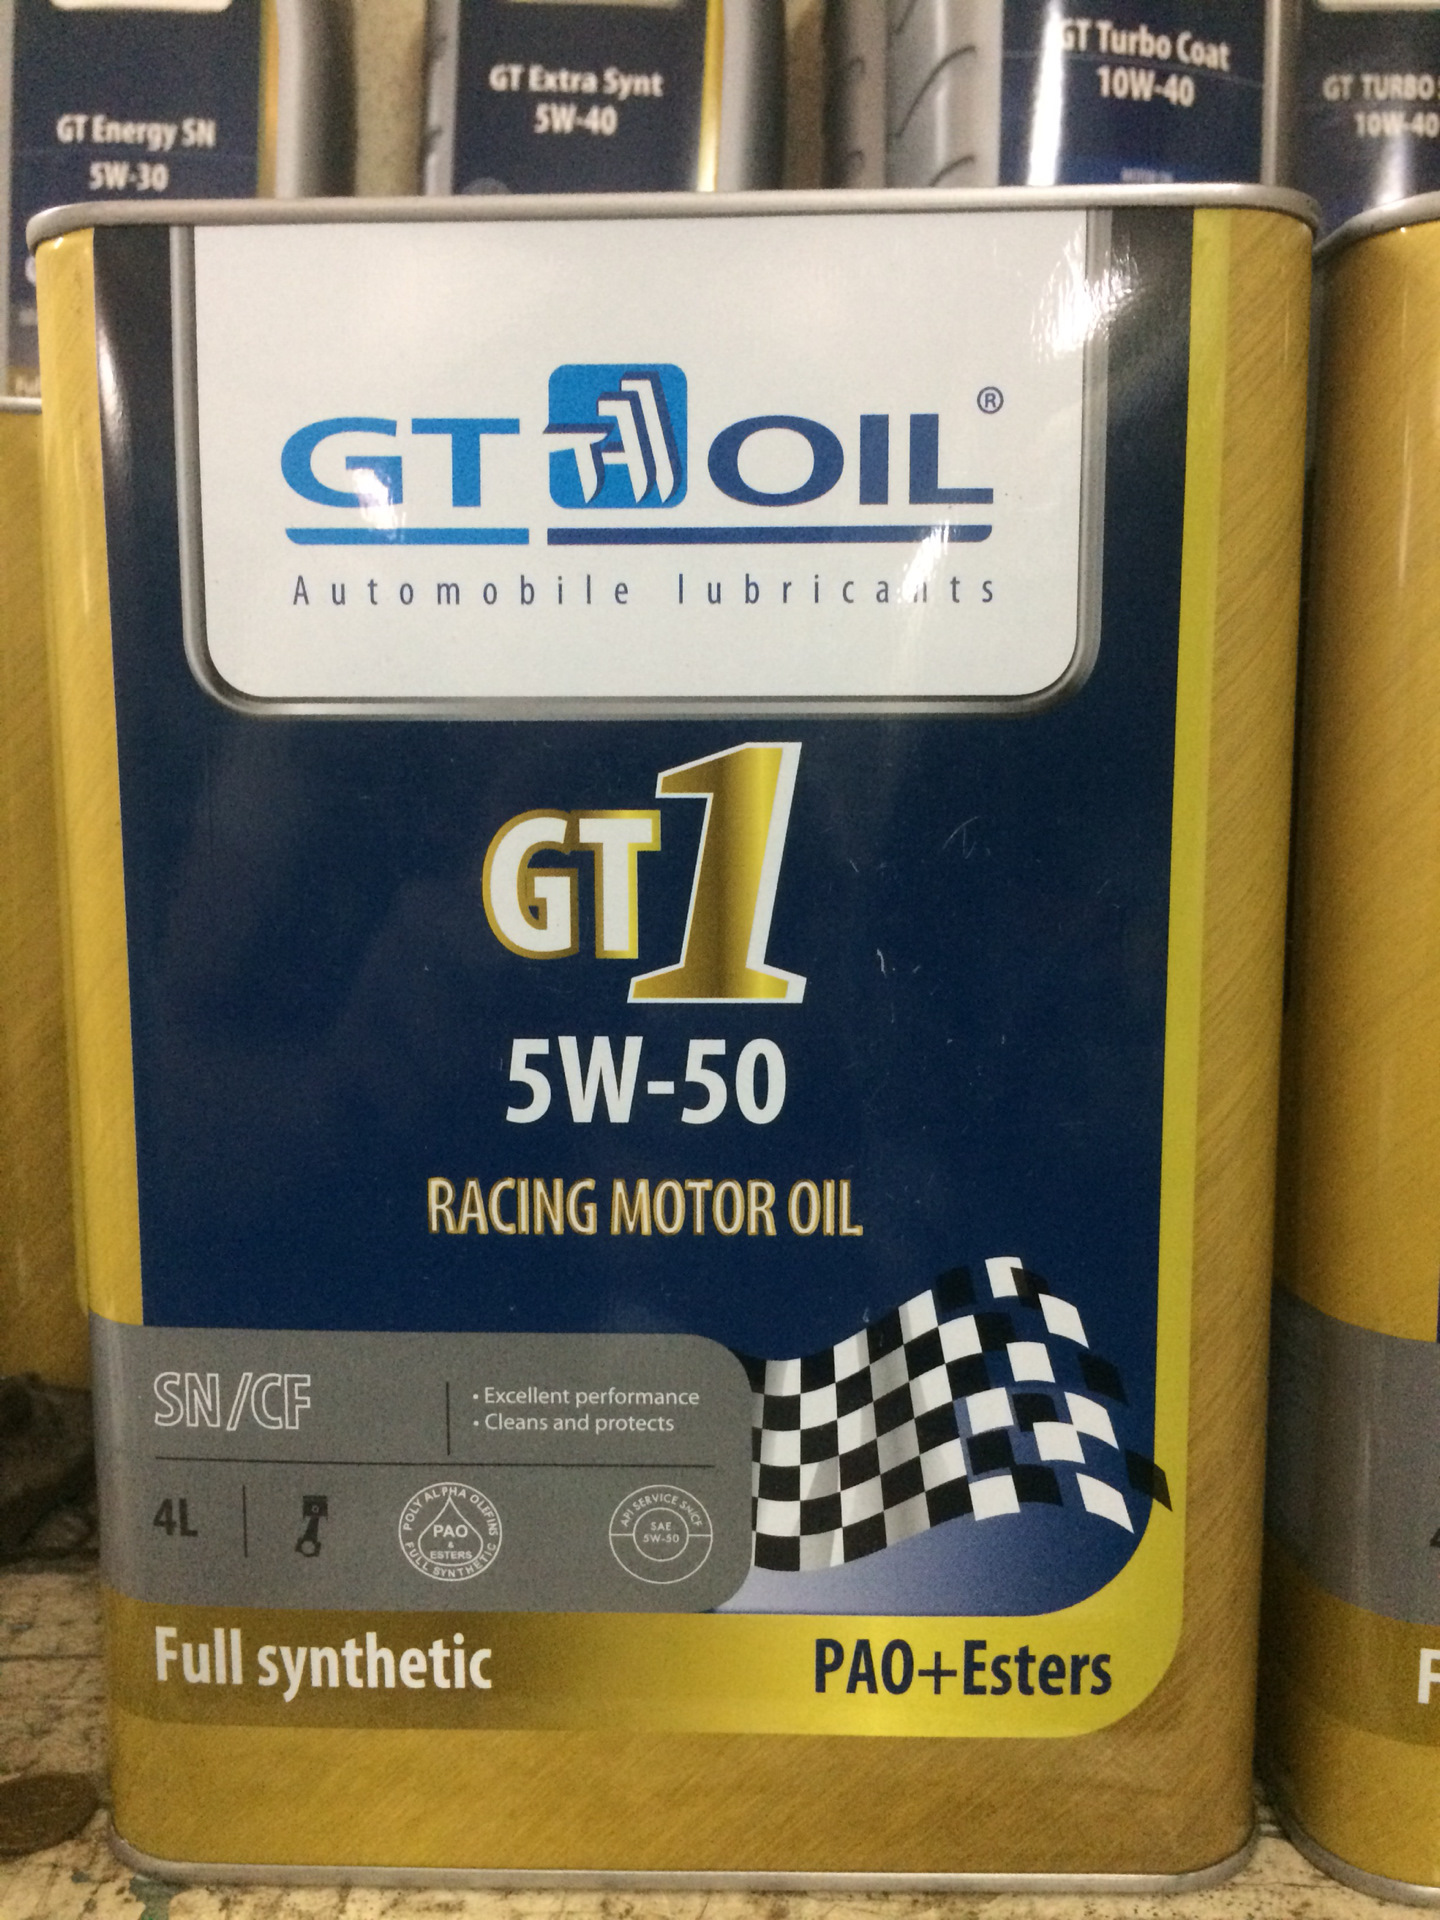 Масло 5 35. Gt Oil 5w40 Extra Synt. Gt Oil 5w40 body 955. Масло gt Oil 5w40 артикул. Gt Oil gt Max Energy 5w-40.